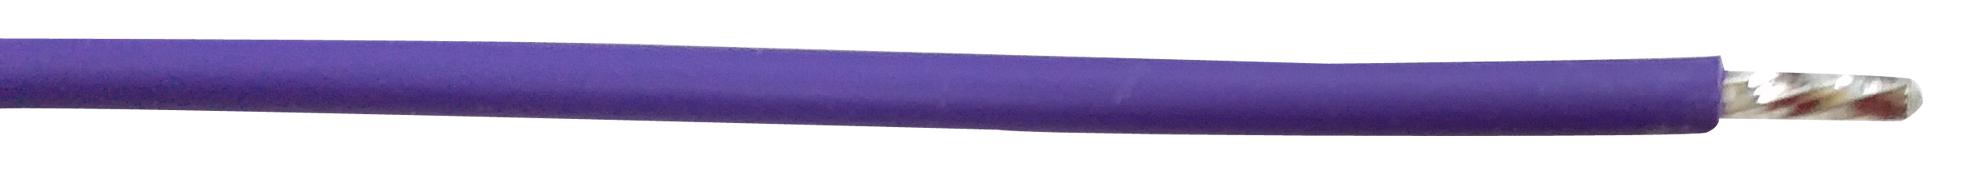 PP002590 CABLE WIRE, 22AWG, PURPLE, 305M PRO POWER